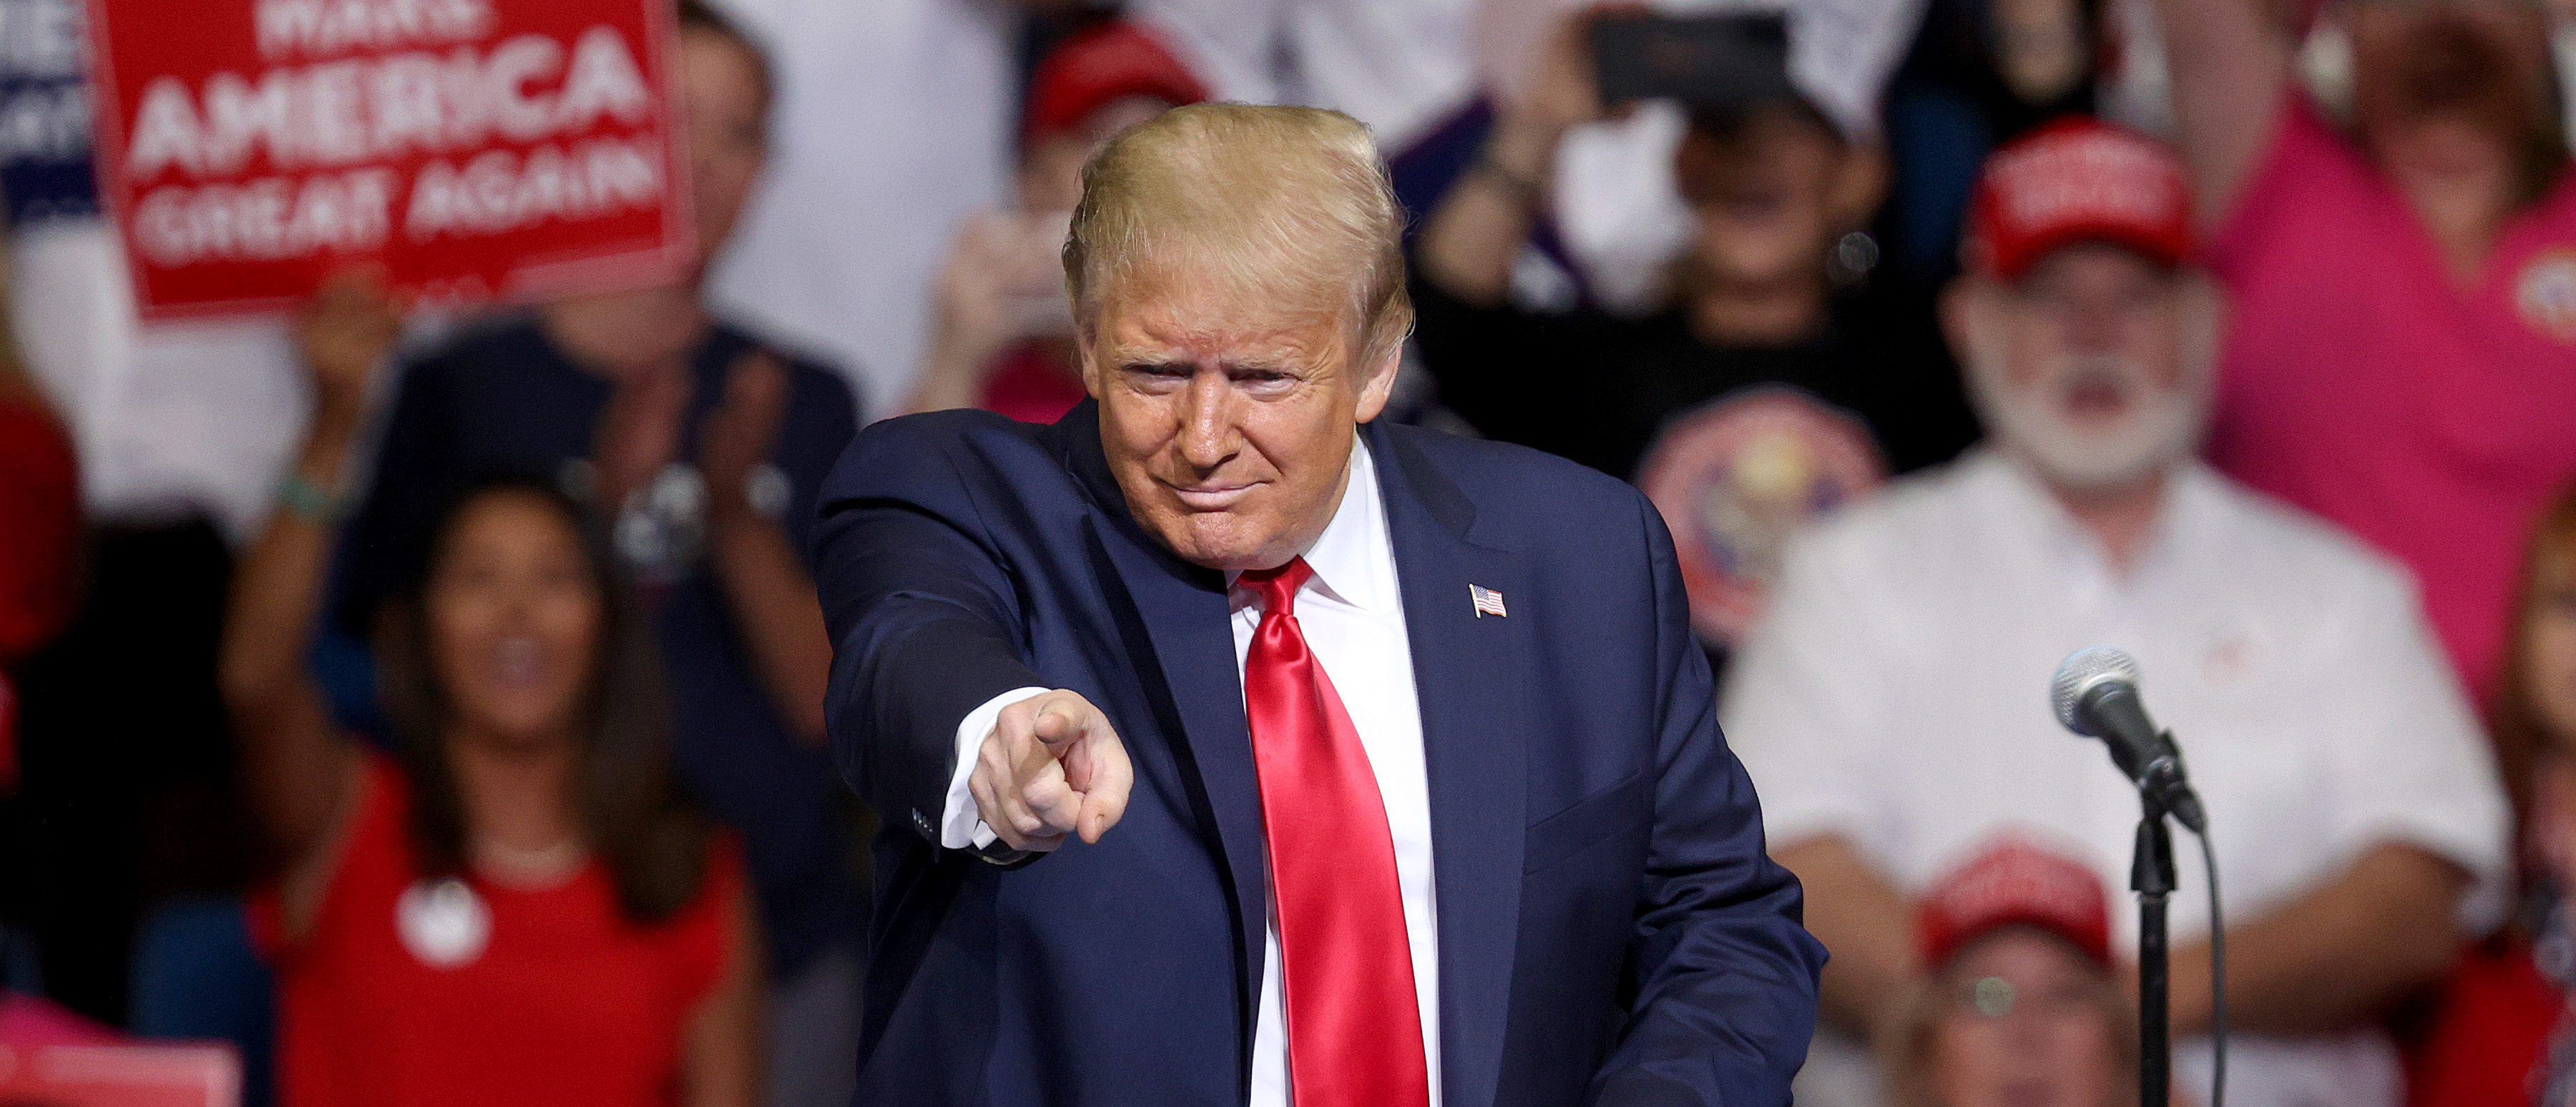 TULSA, OKLAHOMA - JUNE 20: U.S. President Donald Trump arrives at a campaign rally at the BOK Center, June 20, 2020 in Tulsa, Oklahoma. Trump is holding his first political rally since the start of the coronavirus pandemic at the BOK Center today while infection rates in the state of Oklahoma continue to rise. (Photo by Win McNamee/Getty Images)